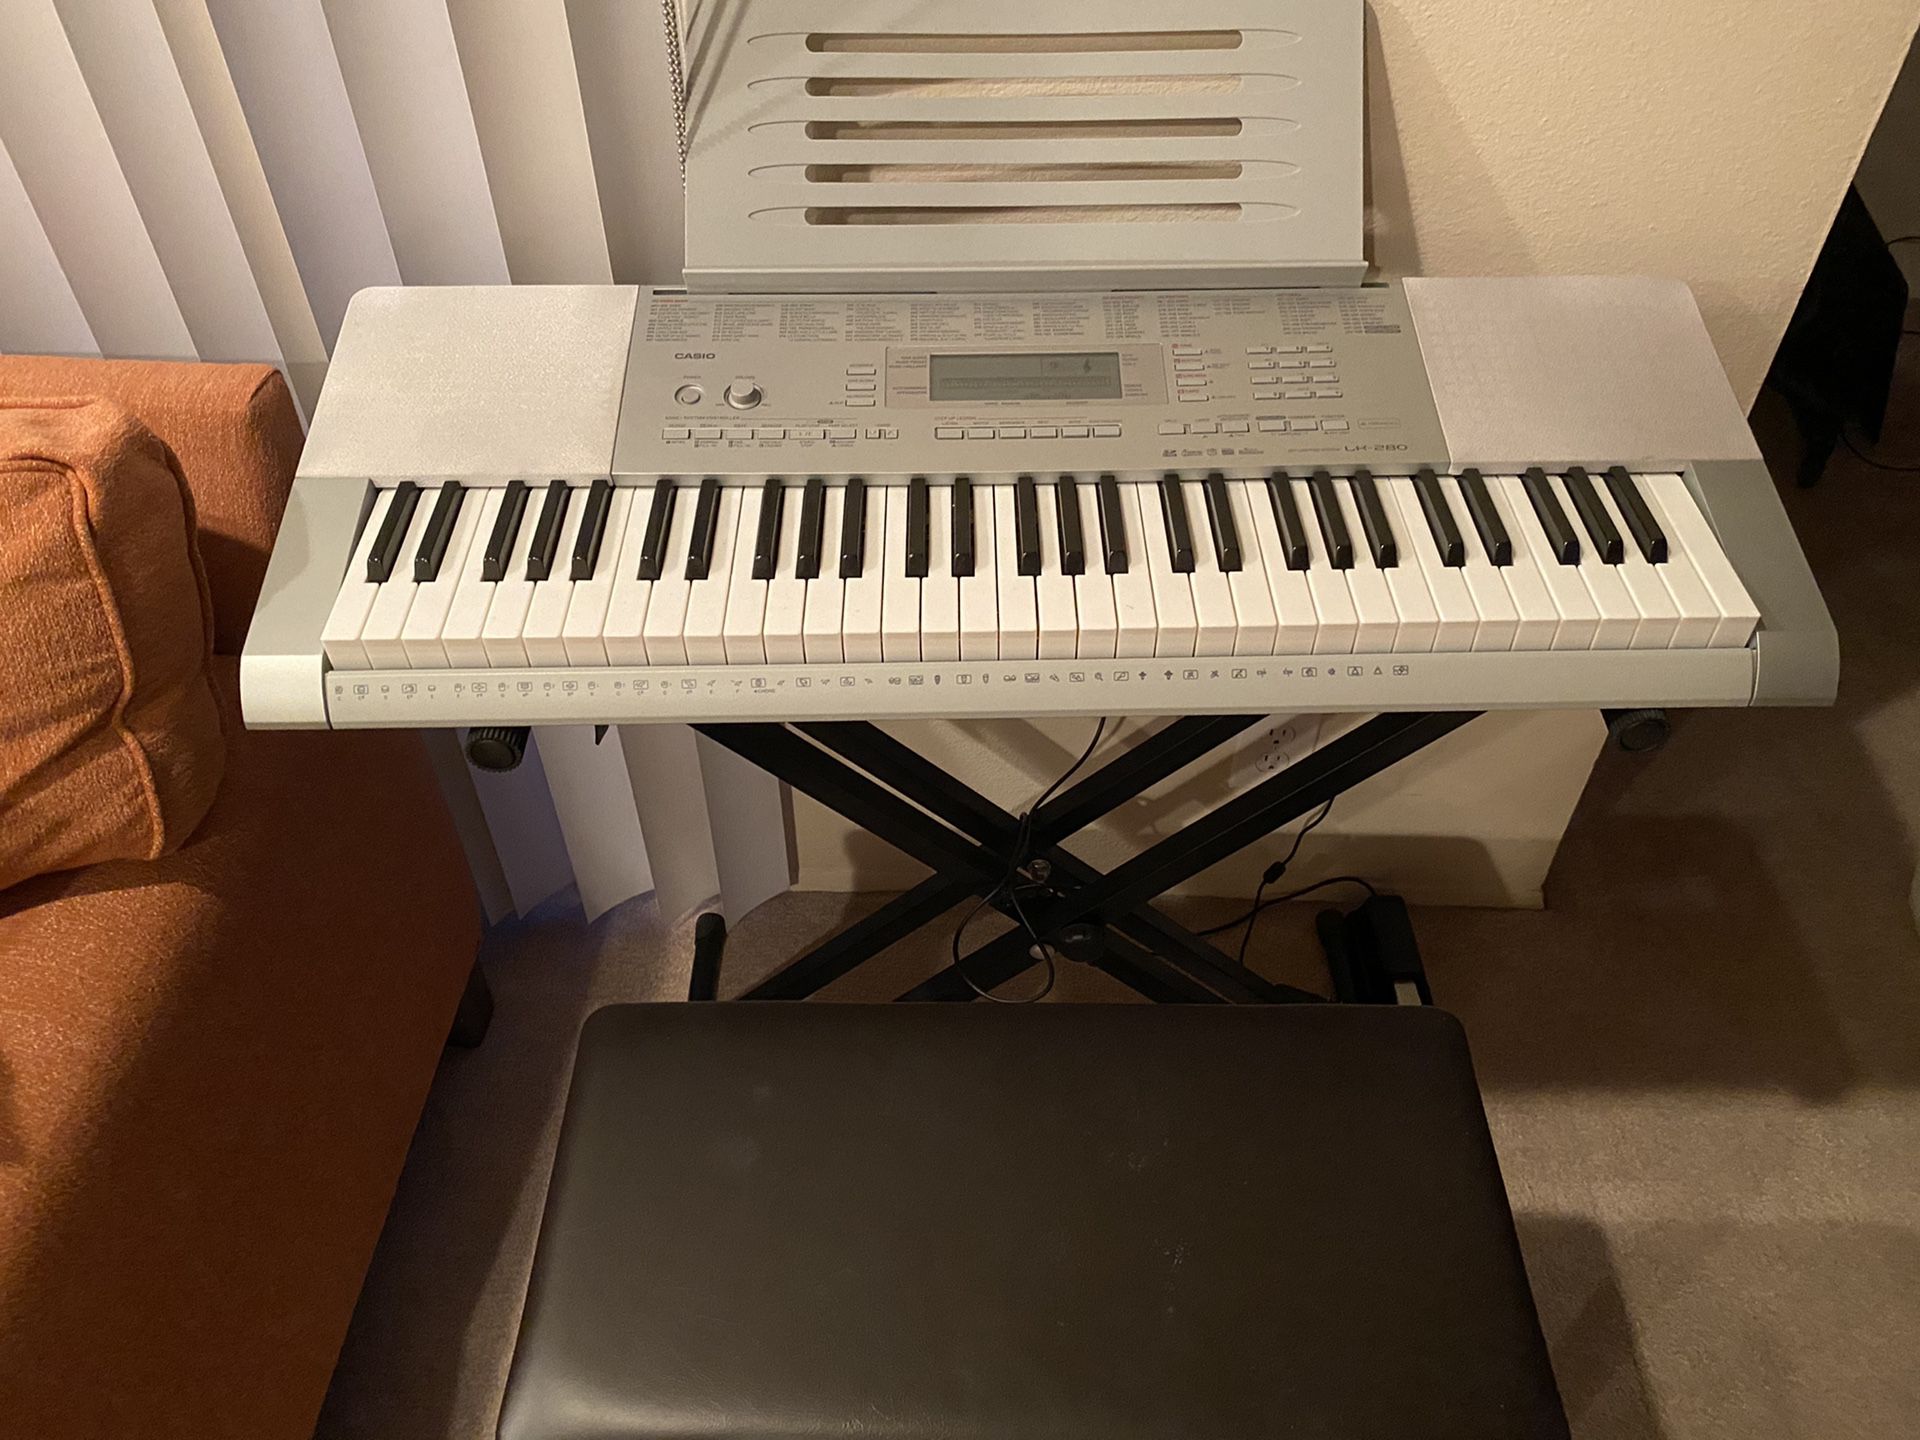 CASIO LK-280 61-Key Lighted USB Keyboard with MP3 Connection, SD Card , and 600 Tones With a Yamaha bench and sustain pedal